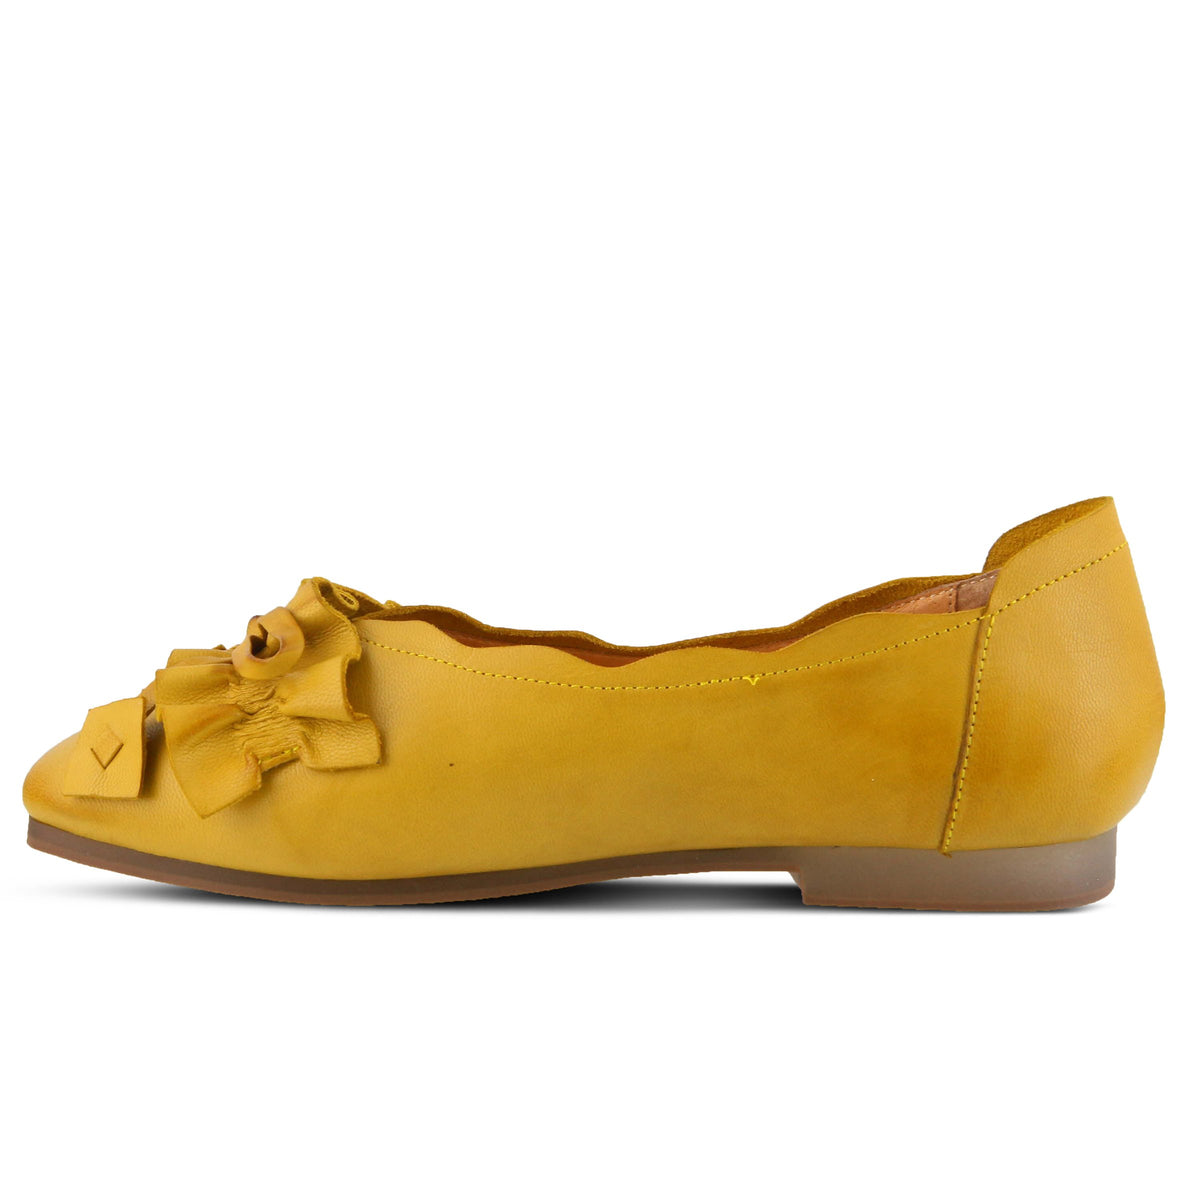 LOUISA BALLERINA by L'ARTISTE – Spring Step Shoes